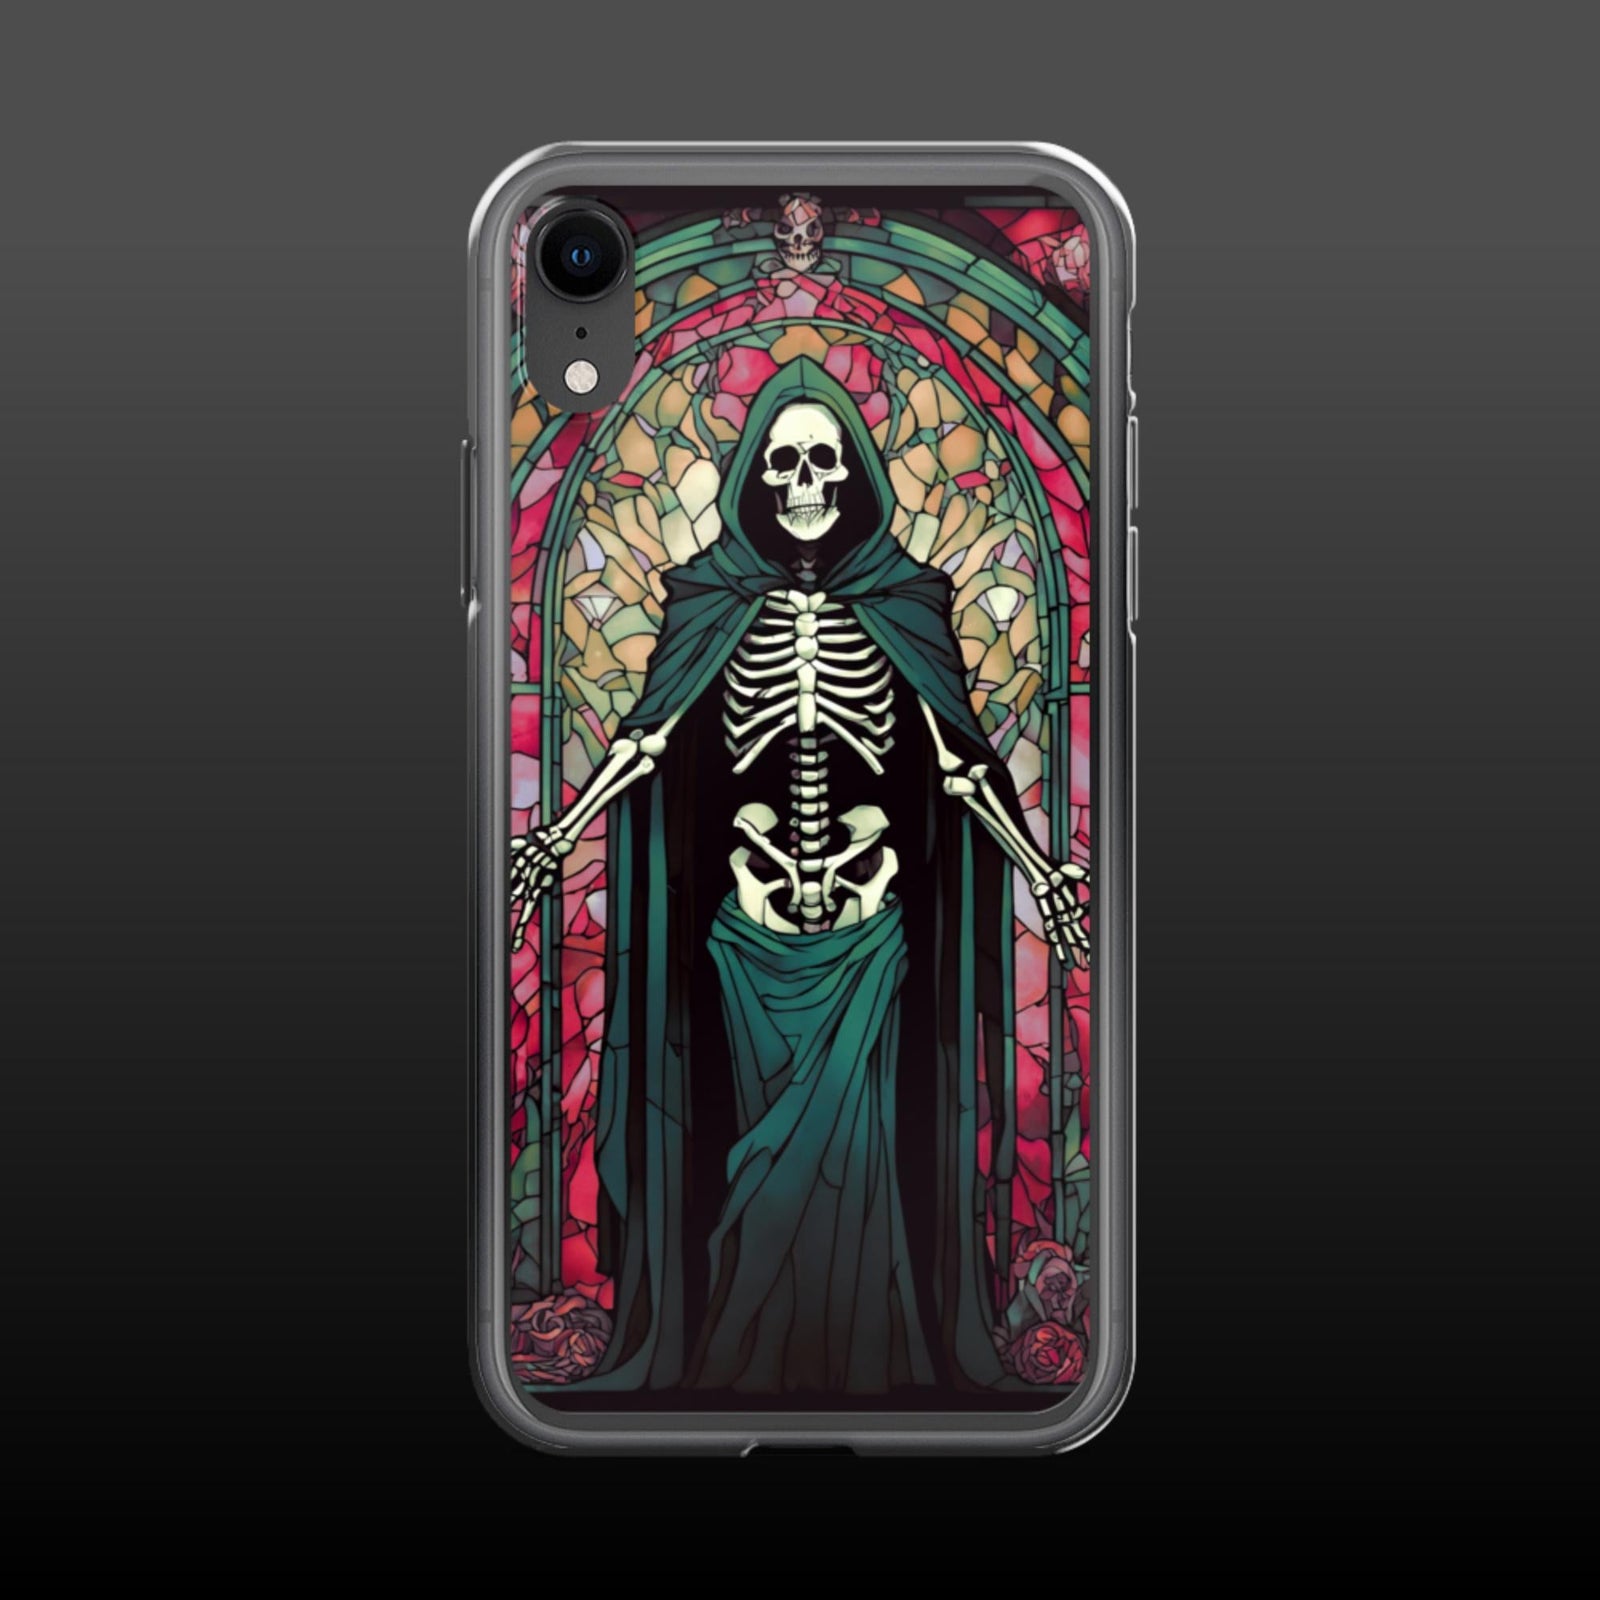 "Thorny underworld" clear iphone case - Clear iphone case - Ever colorful